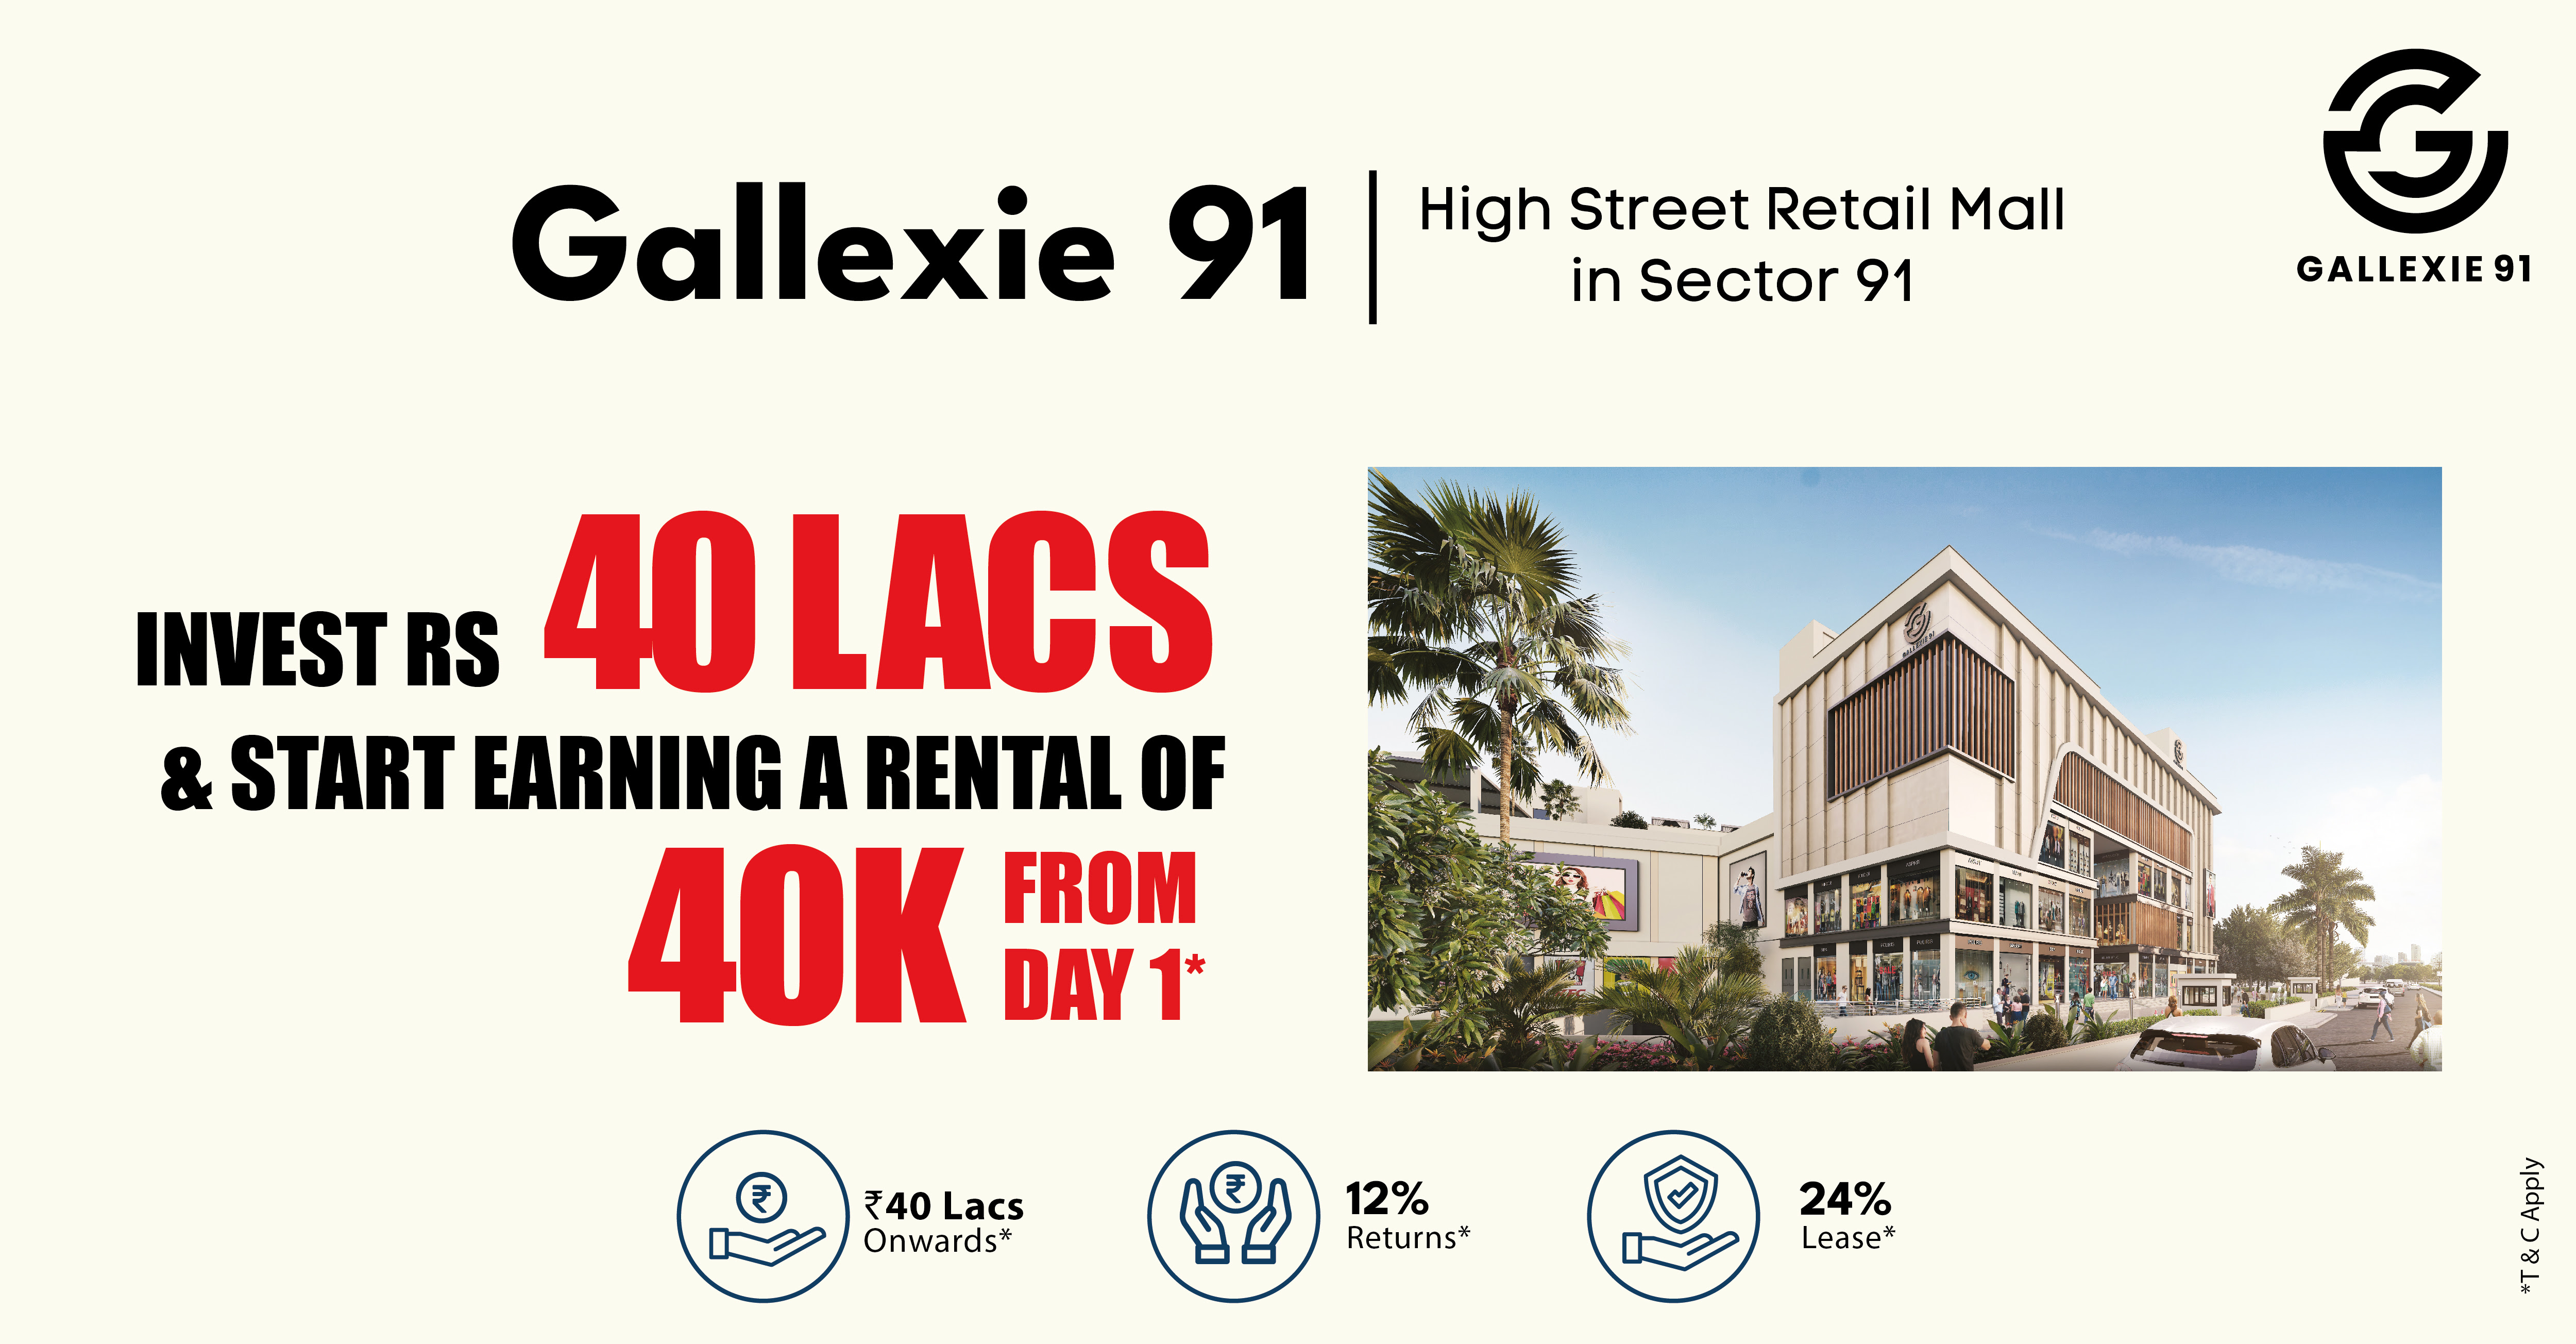 Invest 40 Lac & earn Rs 40k from Day 1 at Axon Gallexie 91, Gurgaon